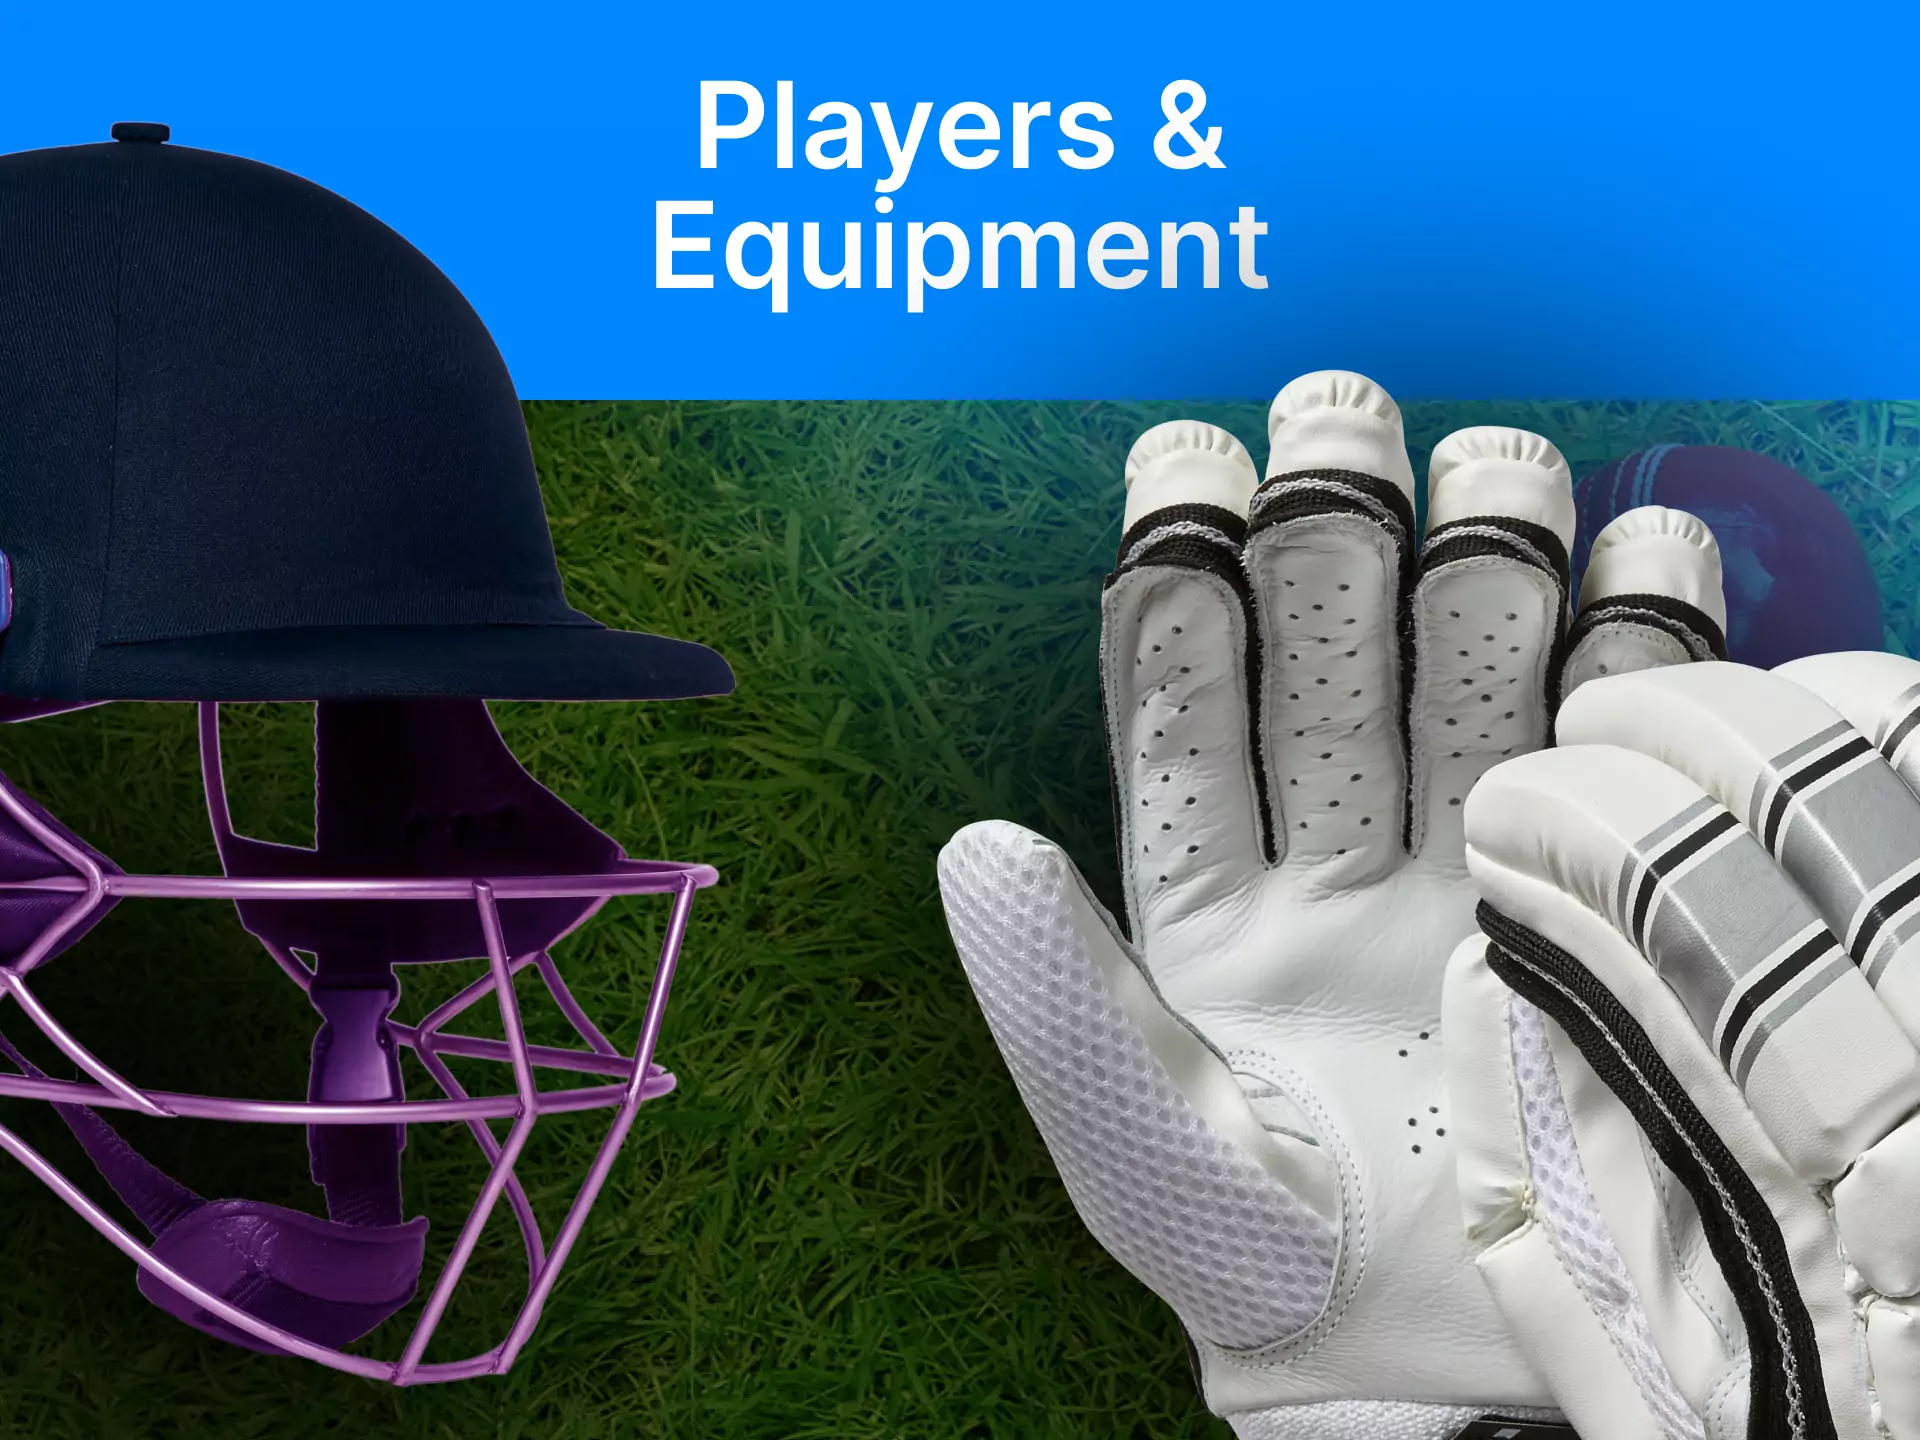 Learn more about cricket players and their equipment.